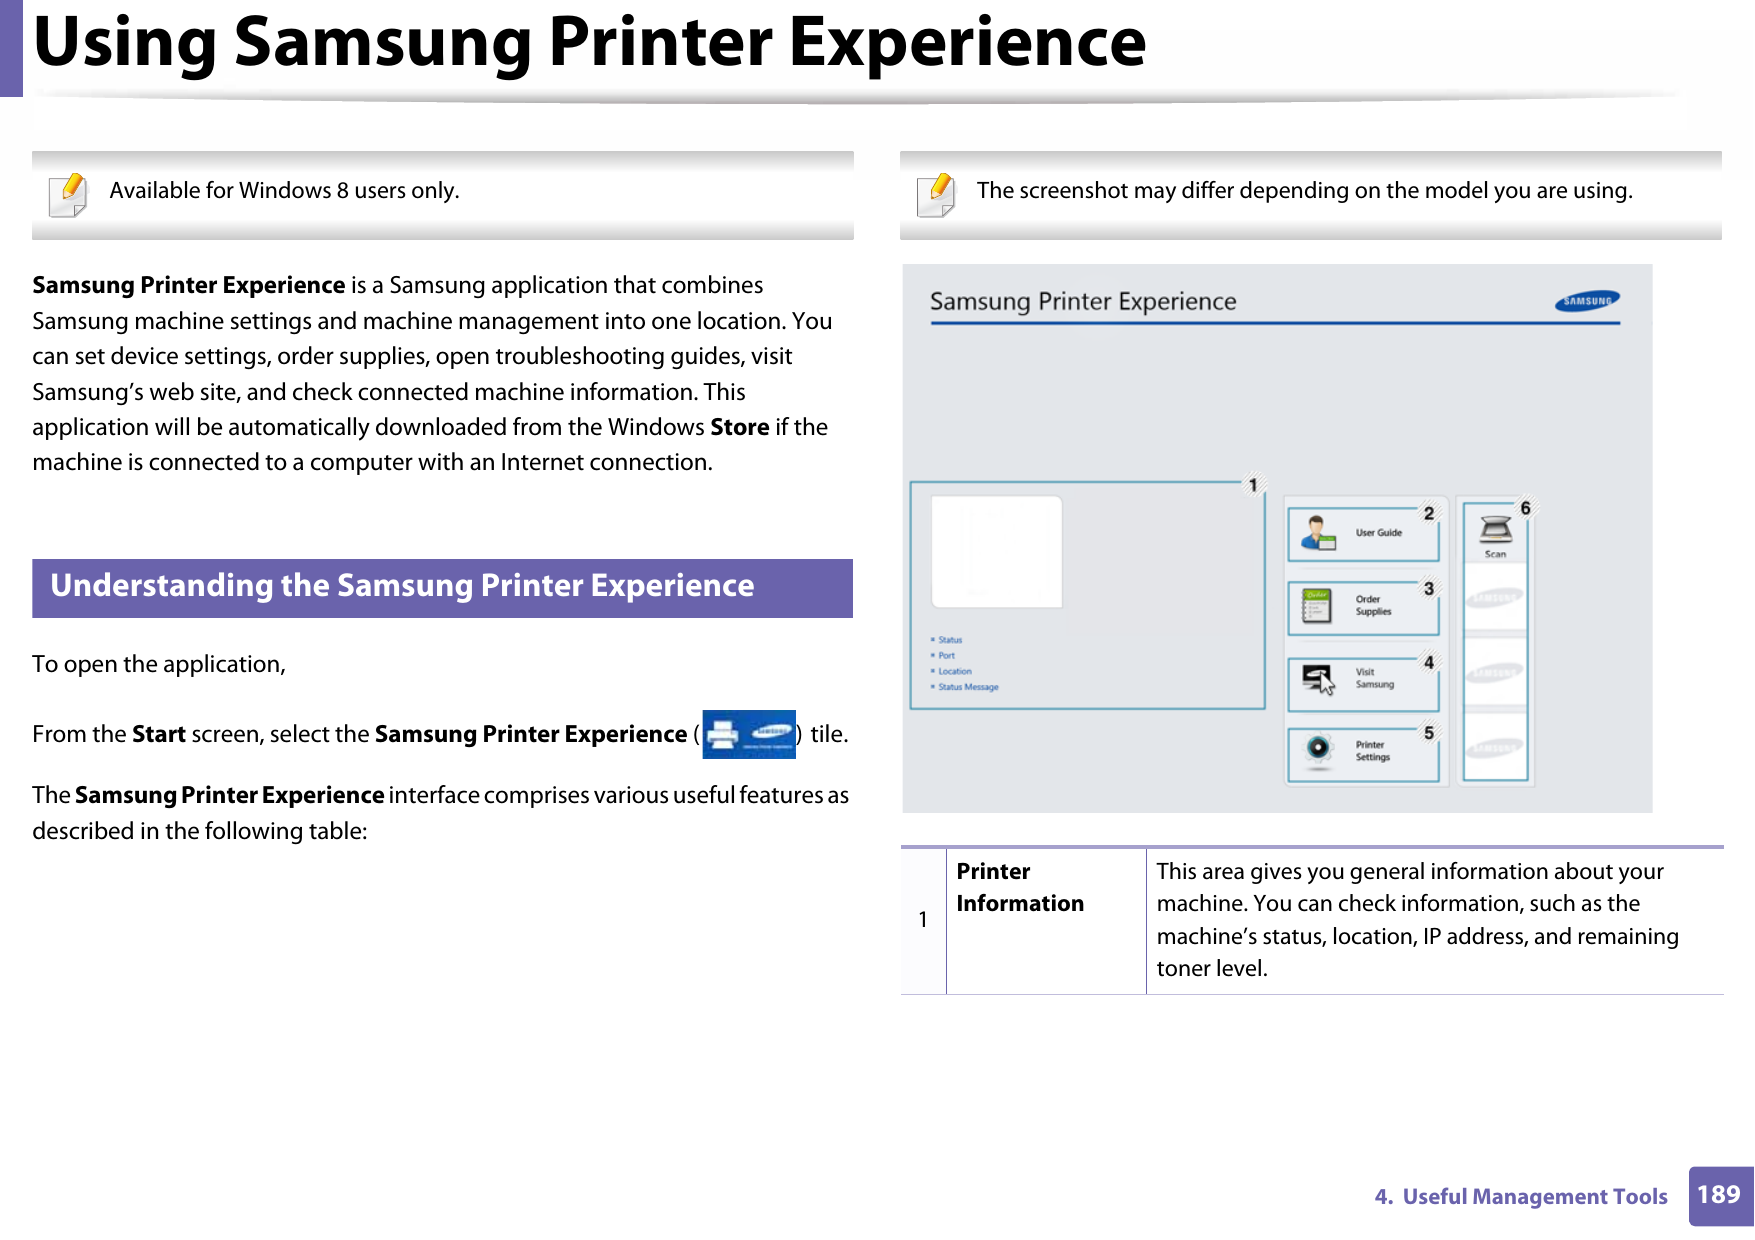 1894.  Useful Management ToolsUsing Samsung Printer Experience  Available for Windows 8 users only. Samsung Printer Experience is a Samsung application that combines Samsung machine settings and machine management into one location. You can set device settings, order supplies, open troubleshooting guides, visit Samsung’s web site, and check connected machine information. This application will be automatically downloaded from the Windows Store if the machine is connected to a computer with an Internet connection. 6 Understanding the Samsung Printer ExperienceTo open the application, From the Start screen, select the Samsung Printer Experience () tile. The Samsung Printer Experience interface comprises various useful features as described in the following table: The screenshot may differ depending on the model you are using. 1Printer InformationThis area gives you general information about your machine. You can check information, such as the machine’s status, location, IP address, and remaining toner level.